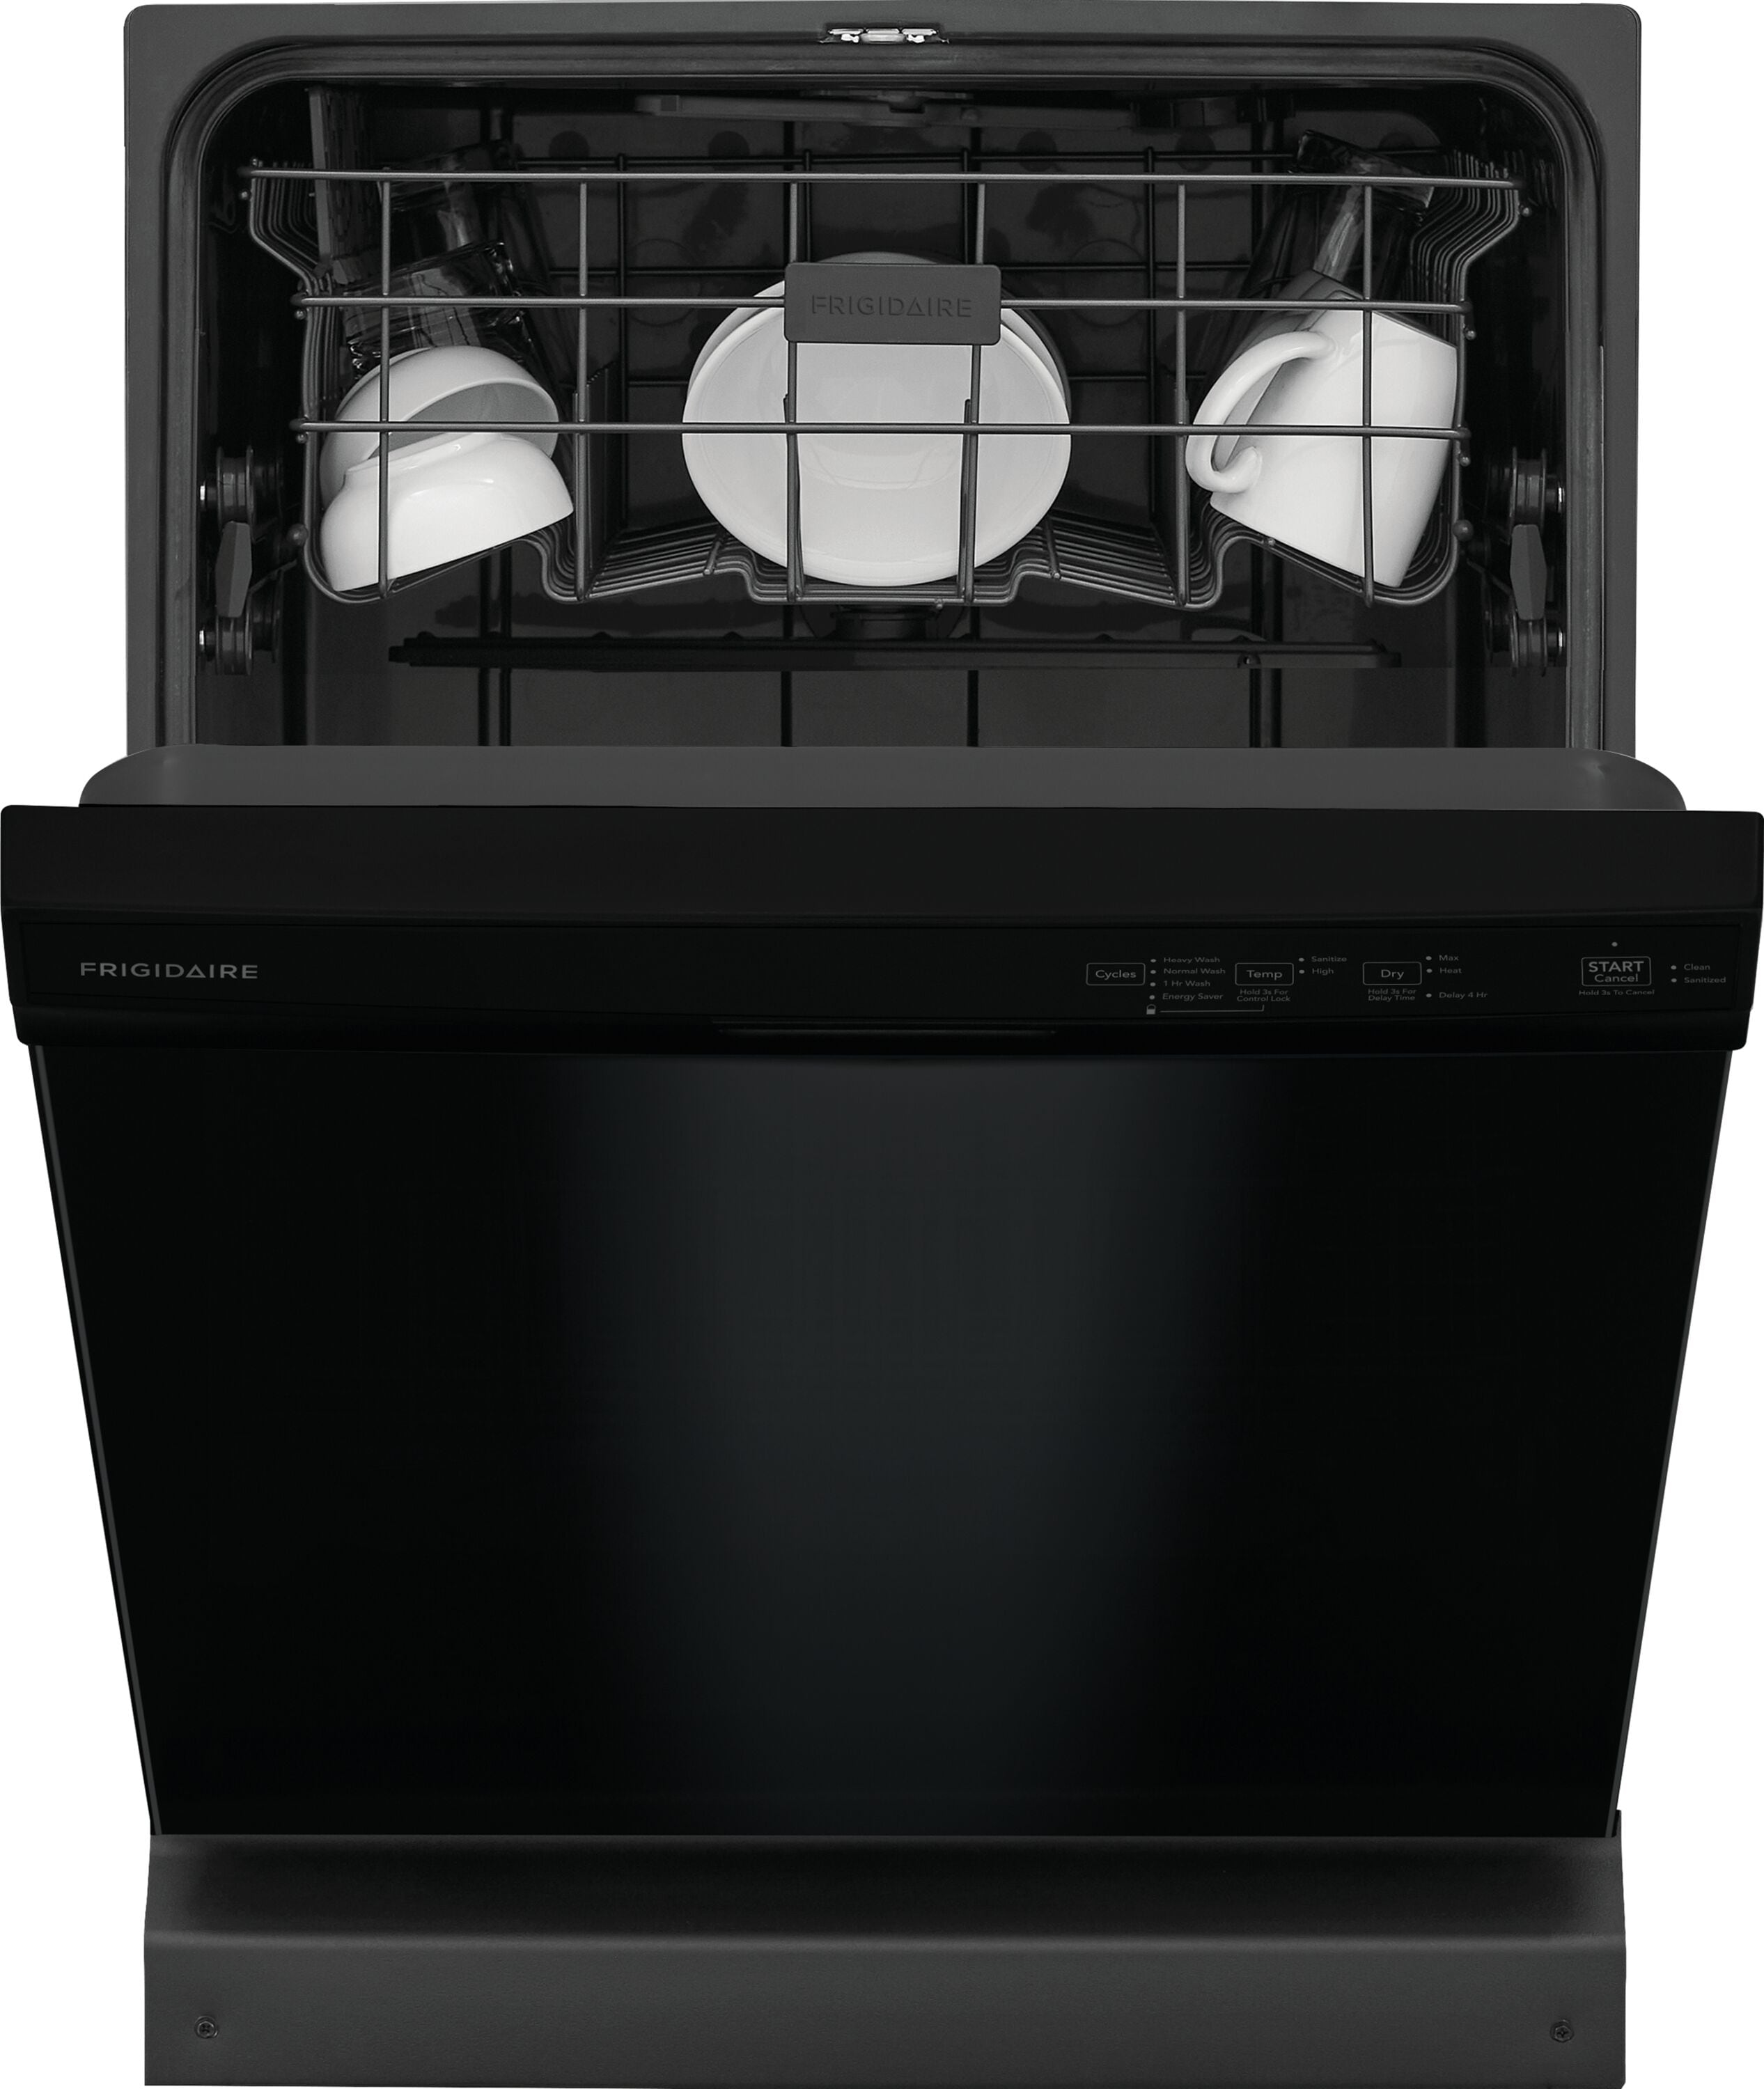 Frigidaire 24 Built-In Dishwasher with 5 Level Wash System in Black